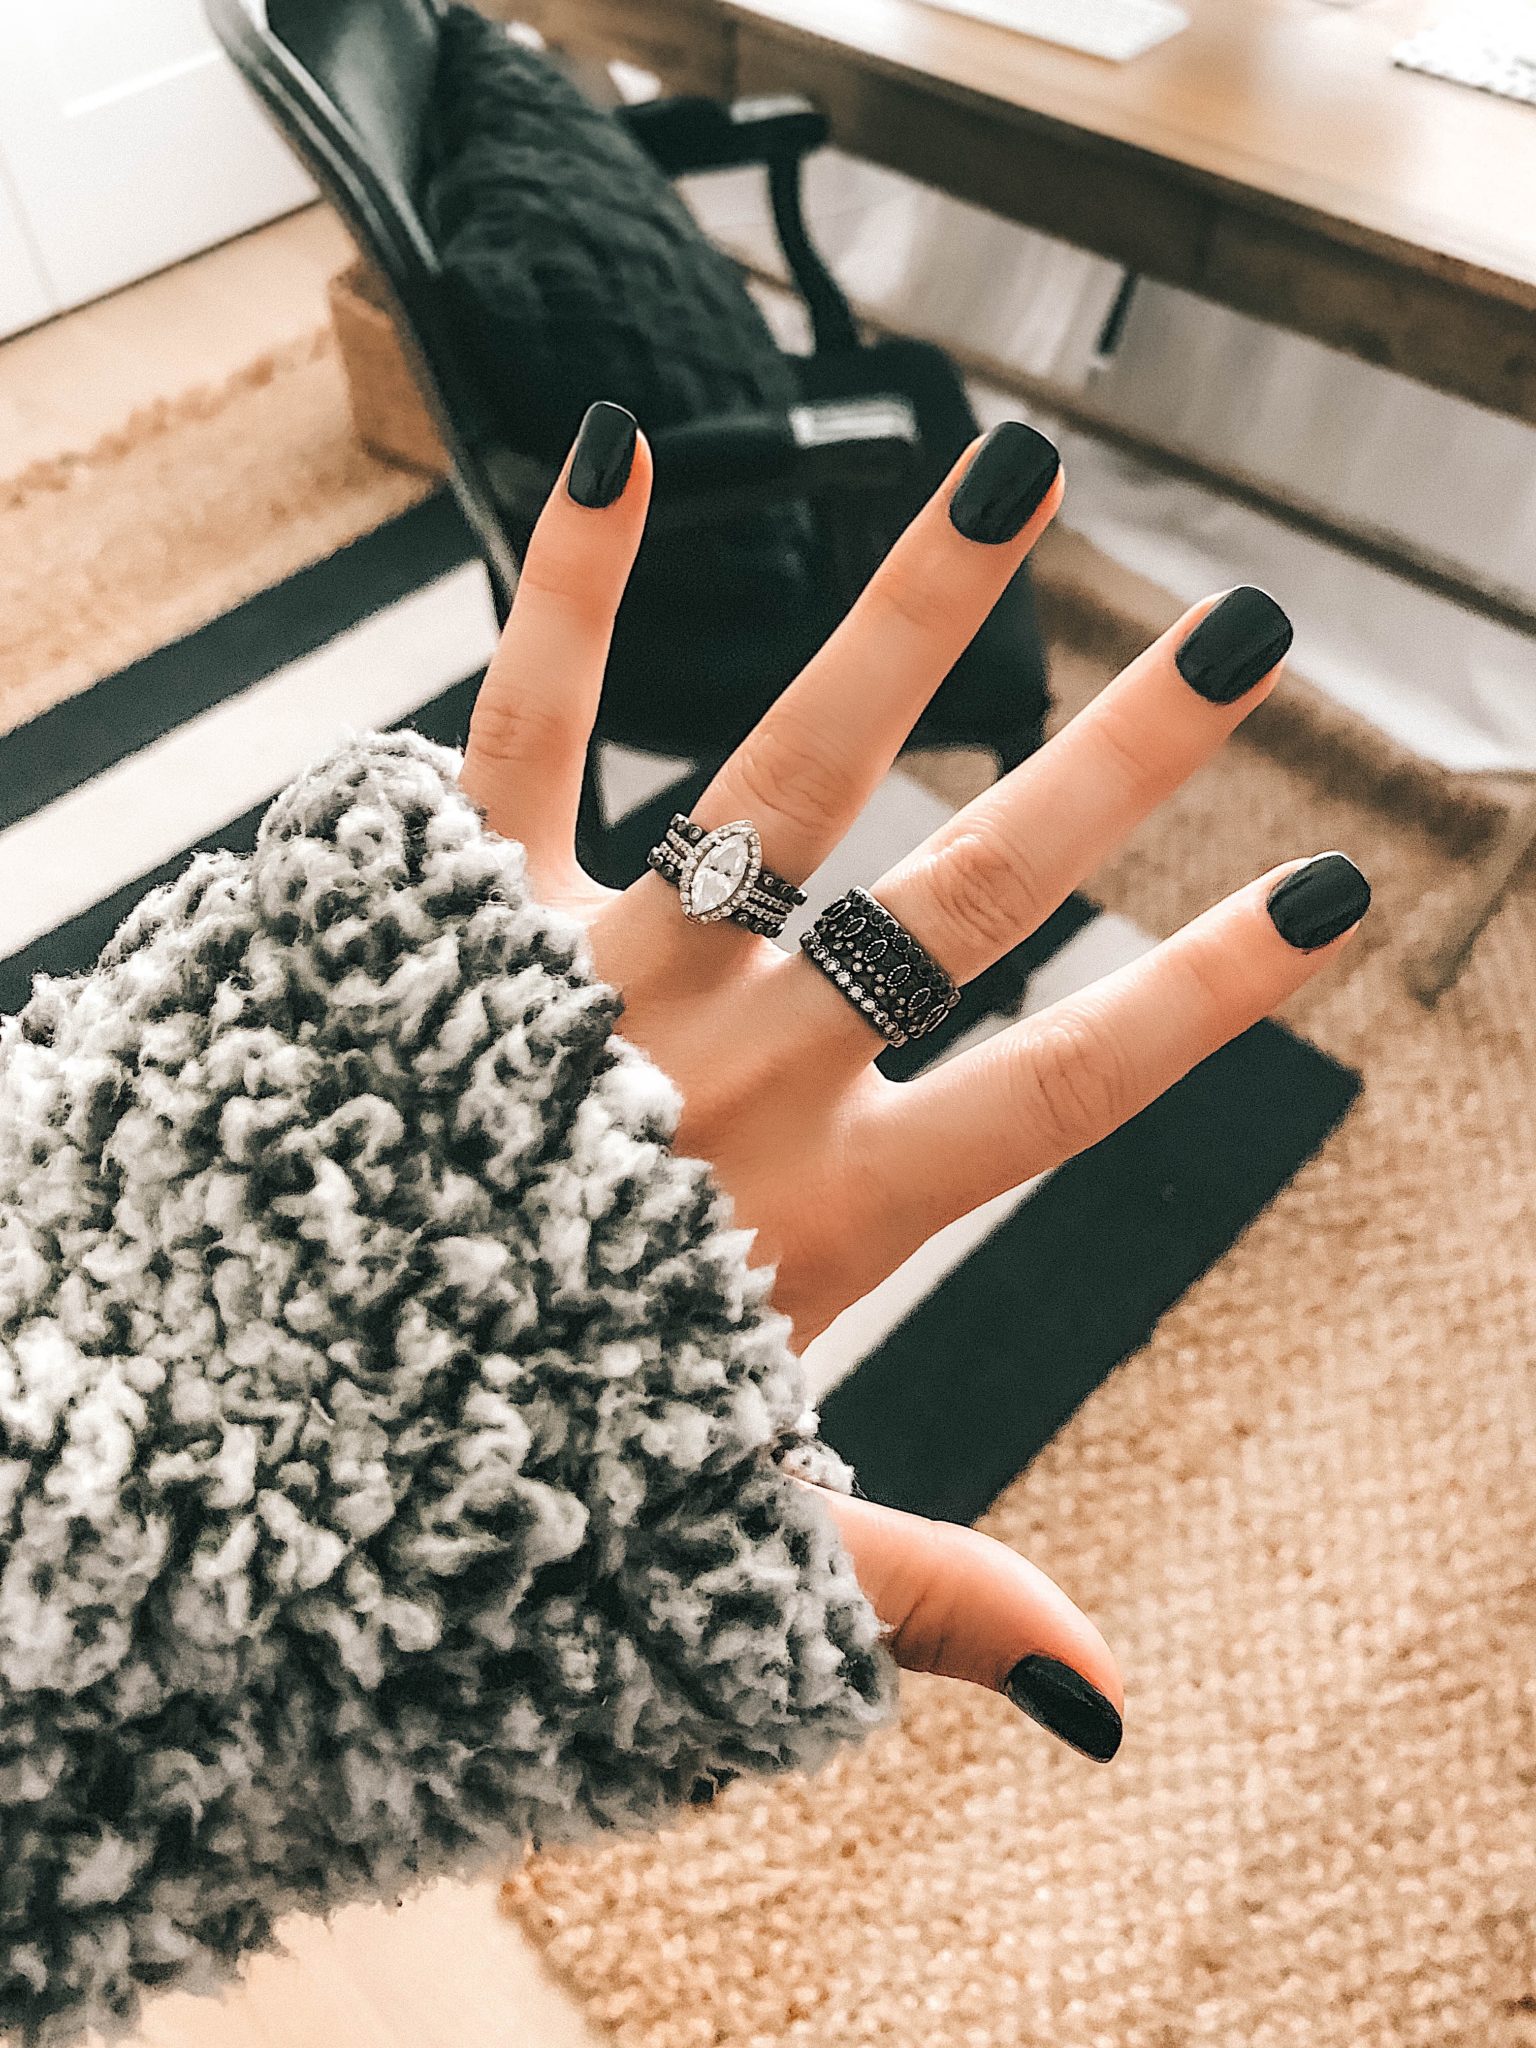 How to Wear Armenta Stackable Rings by popular Austin fashion blog, Dressed to Kill: image a woman's hand with and Armenta stackable ring set on it.